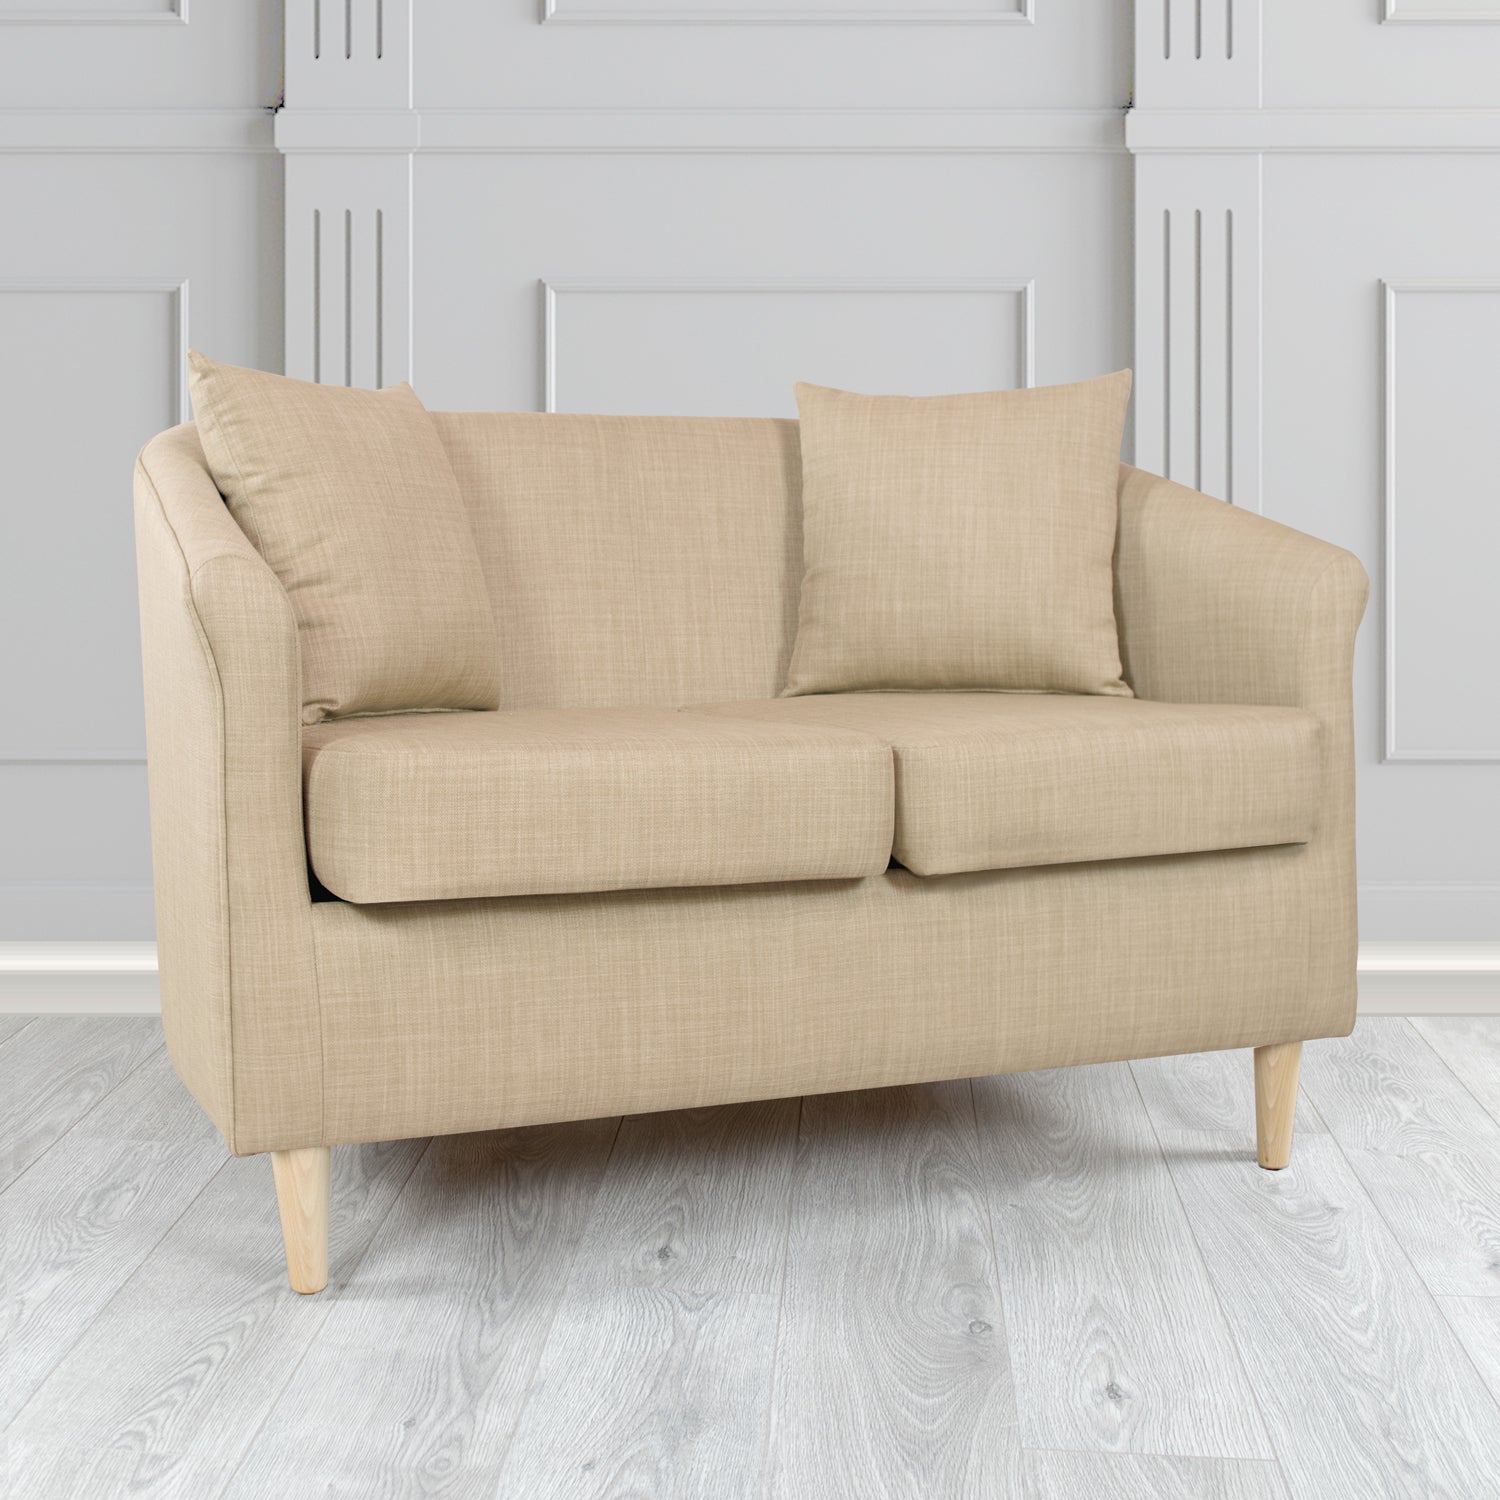 St Tropez Charles Sand Plain Linen Fabric 2 Seater Tub Sofa with Scatter Cushions - The Tub Chair Shop